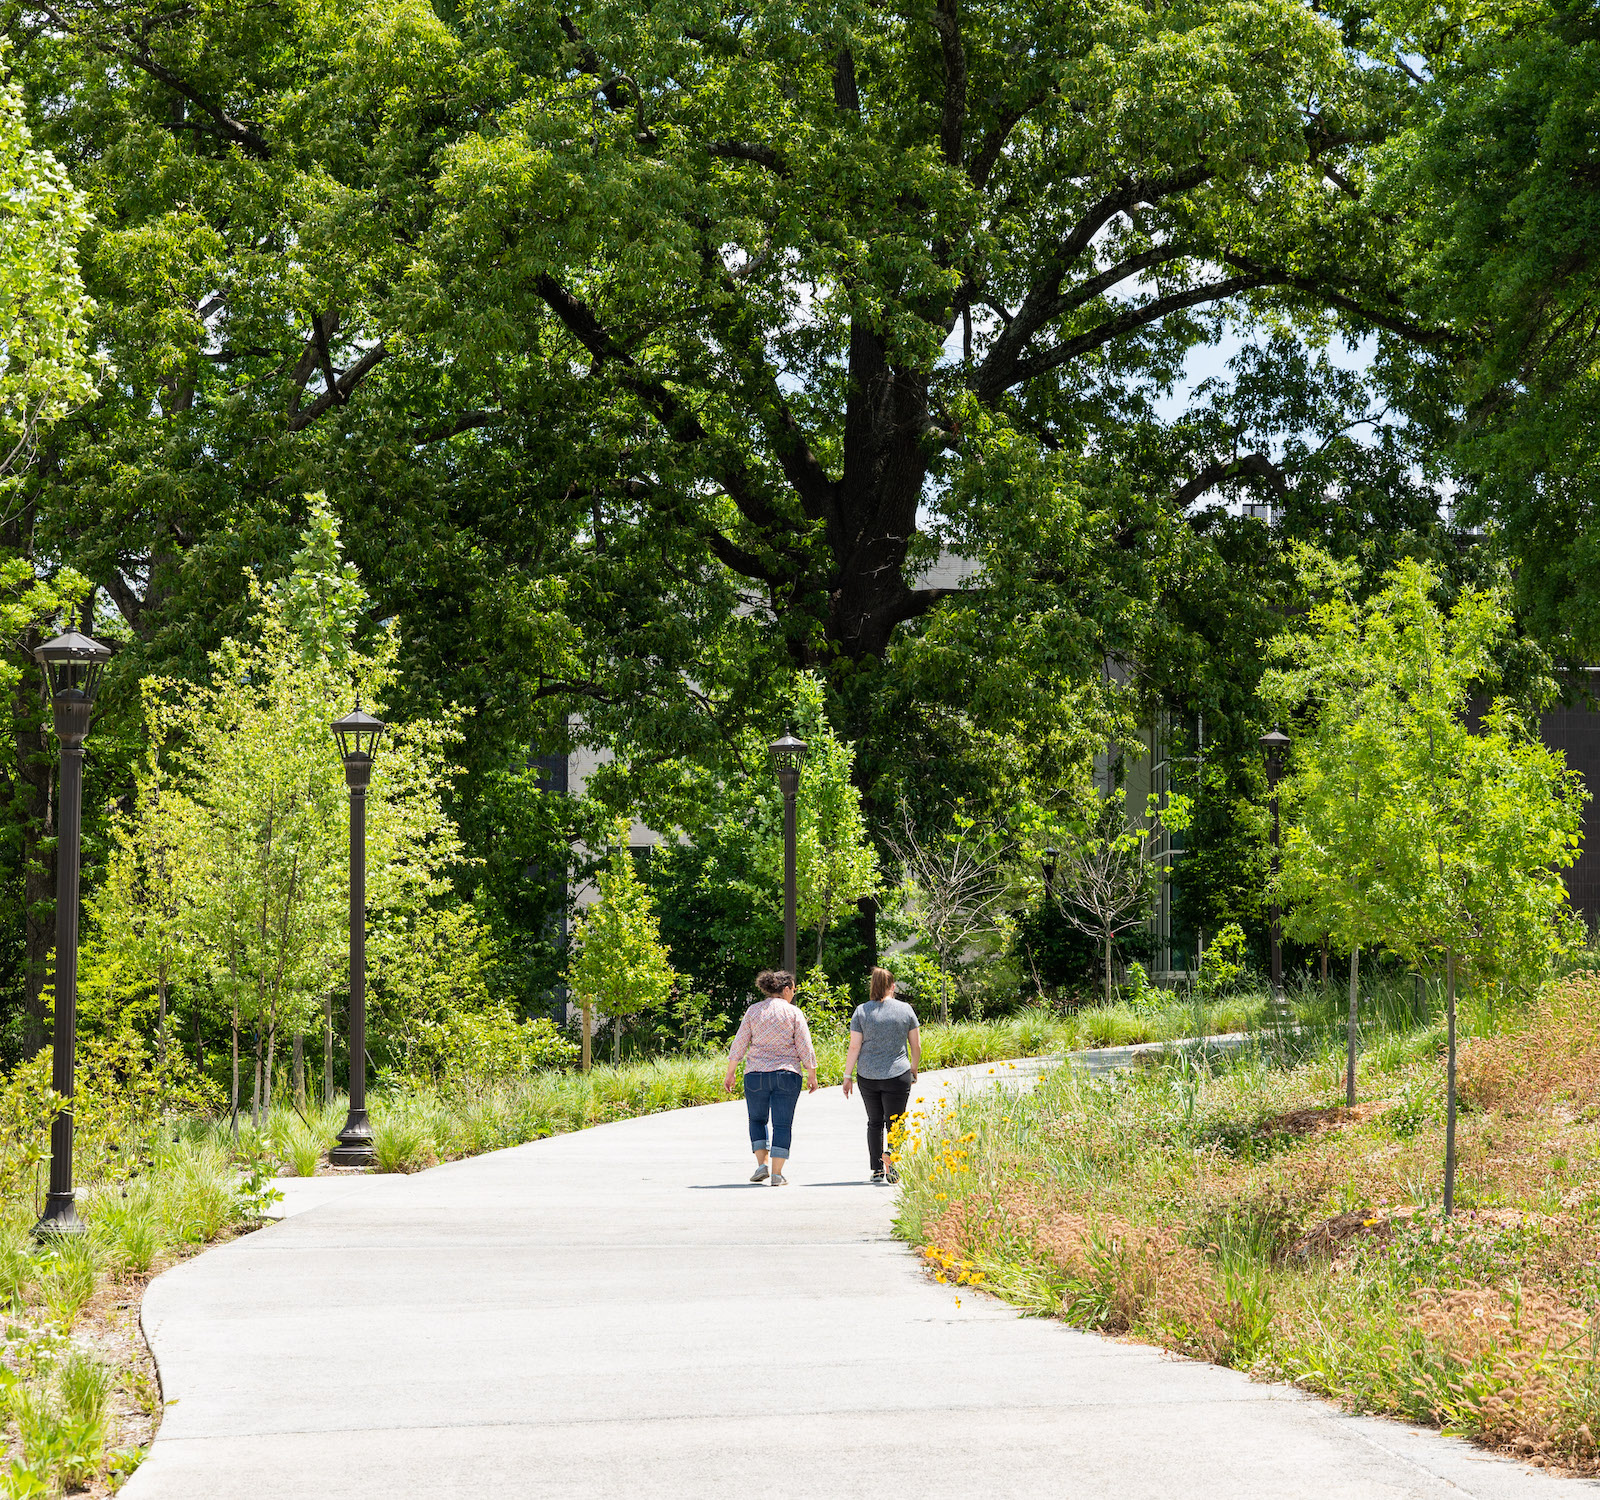 The EcoCommons, a lush greenspace along Ferst Drive, has wide pathways for walking.